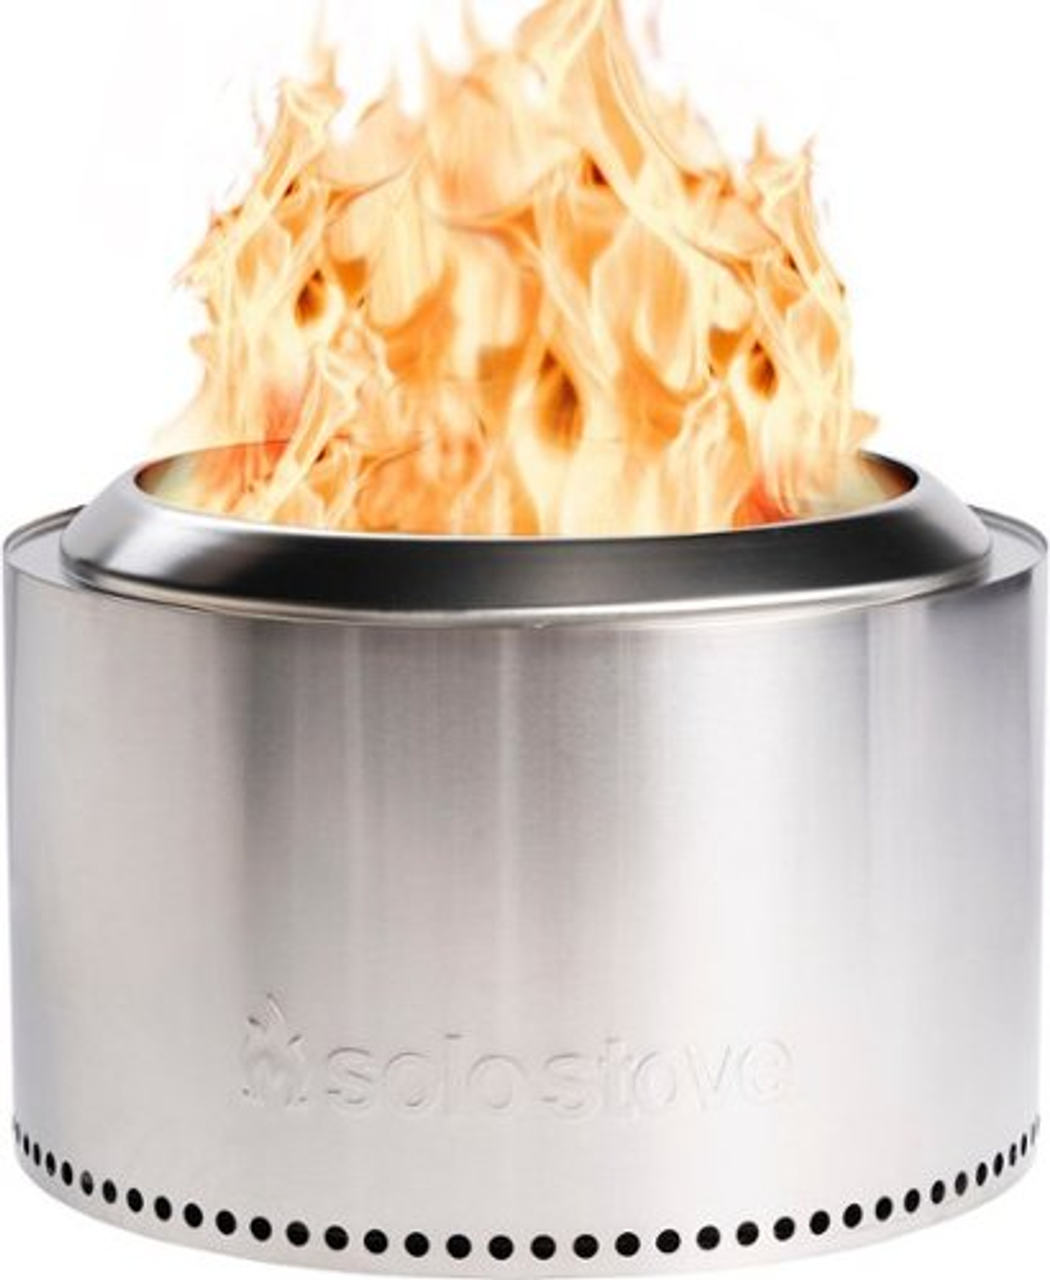 Solo Stove - Yukon Wood Burning Fire Pit - Silver